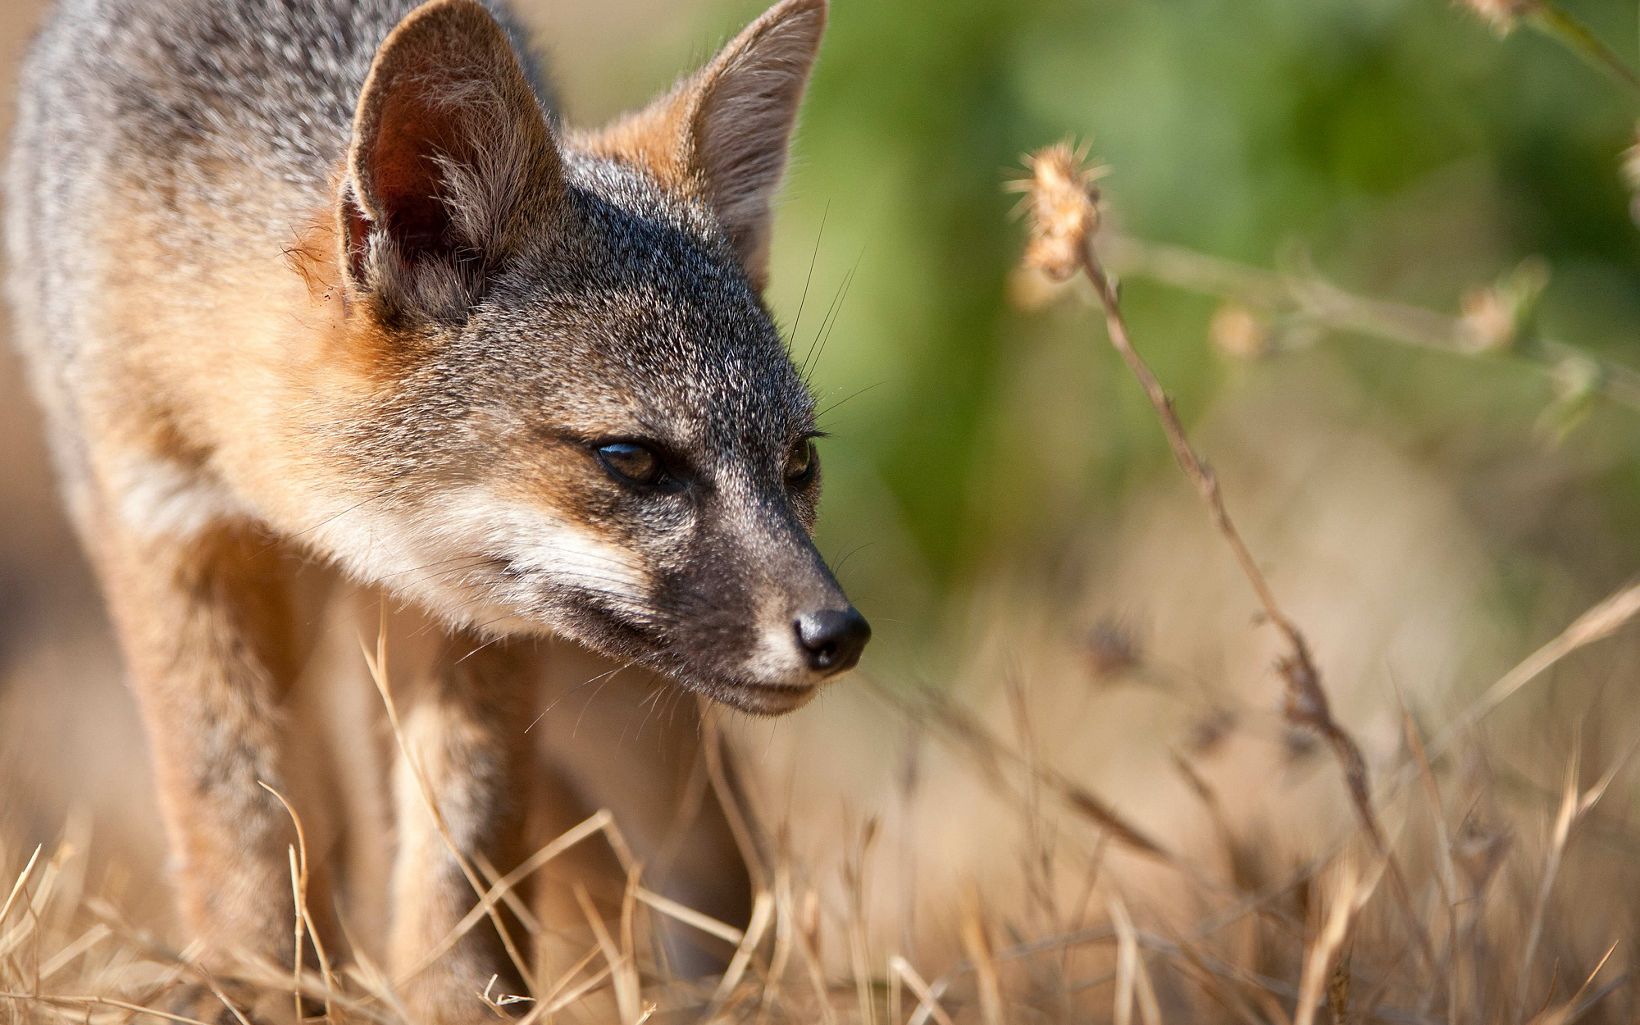 Santa Cruz Island Santa Cruz Island foxes faced bleak odds 16 years ago until TNC and local partners brought them back from the brink of extinction. © Ian Shive